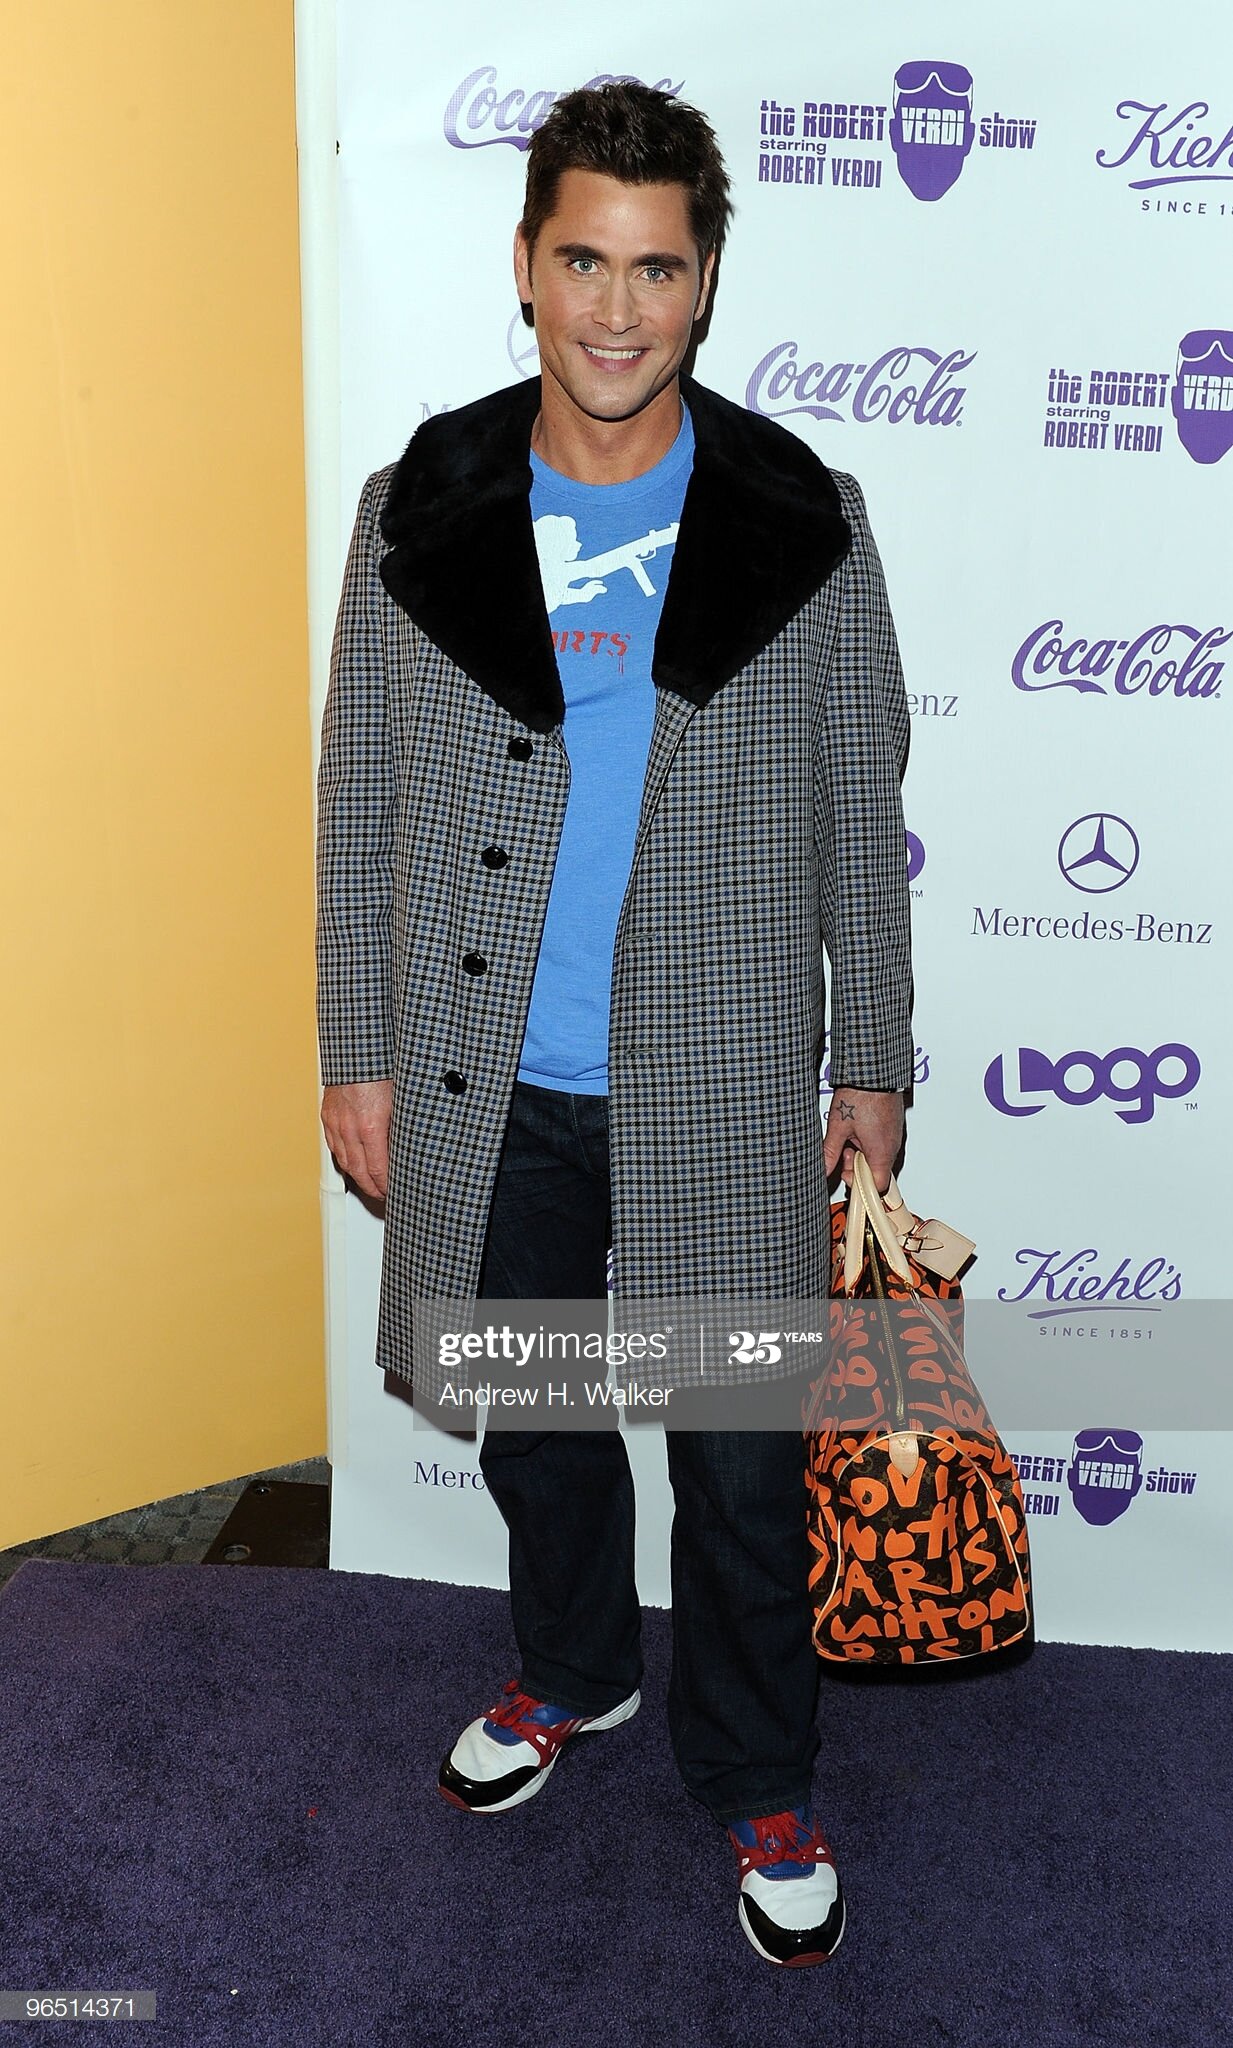  NEW YORK - FEBRUARY 08:  Jack Mackenroth attends the premiere screening of "The Robert Verdi Show Starring Robert Verdi" at the SVA Theater on February 8, 2010 in New York City.  (Photo by Andrew H. Walker/Getty Images) 